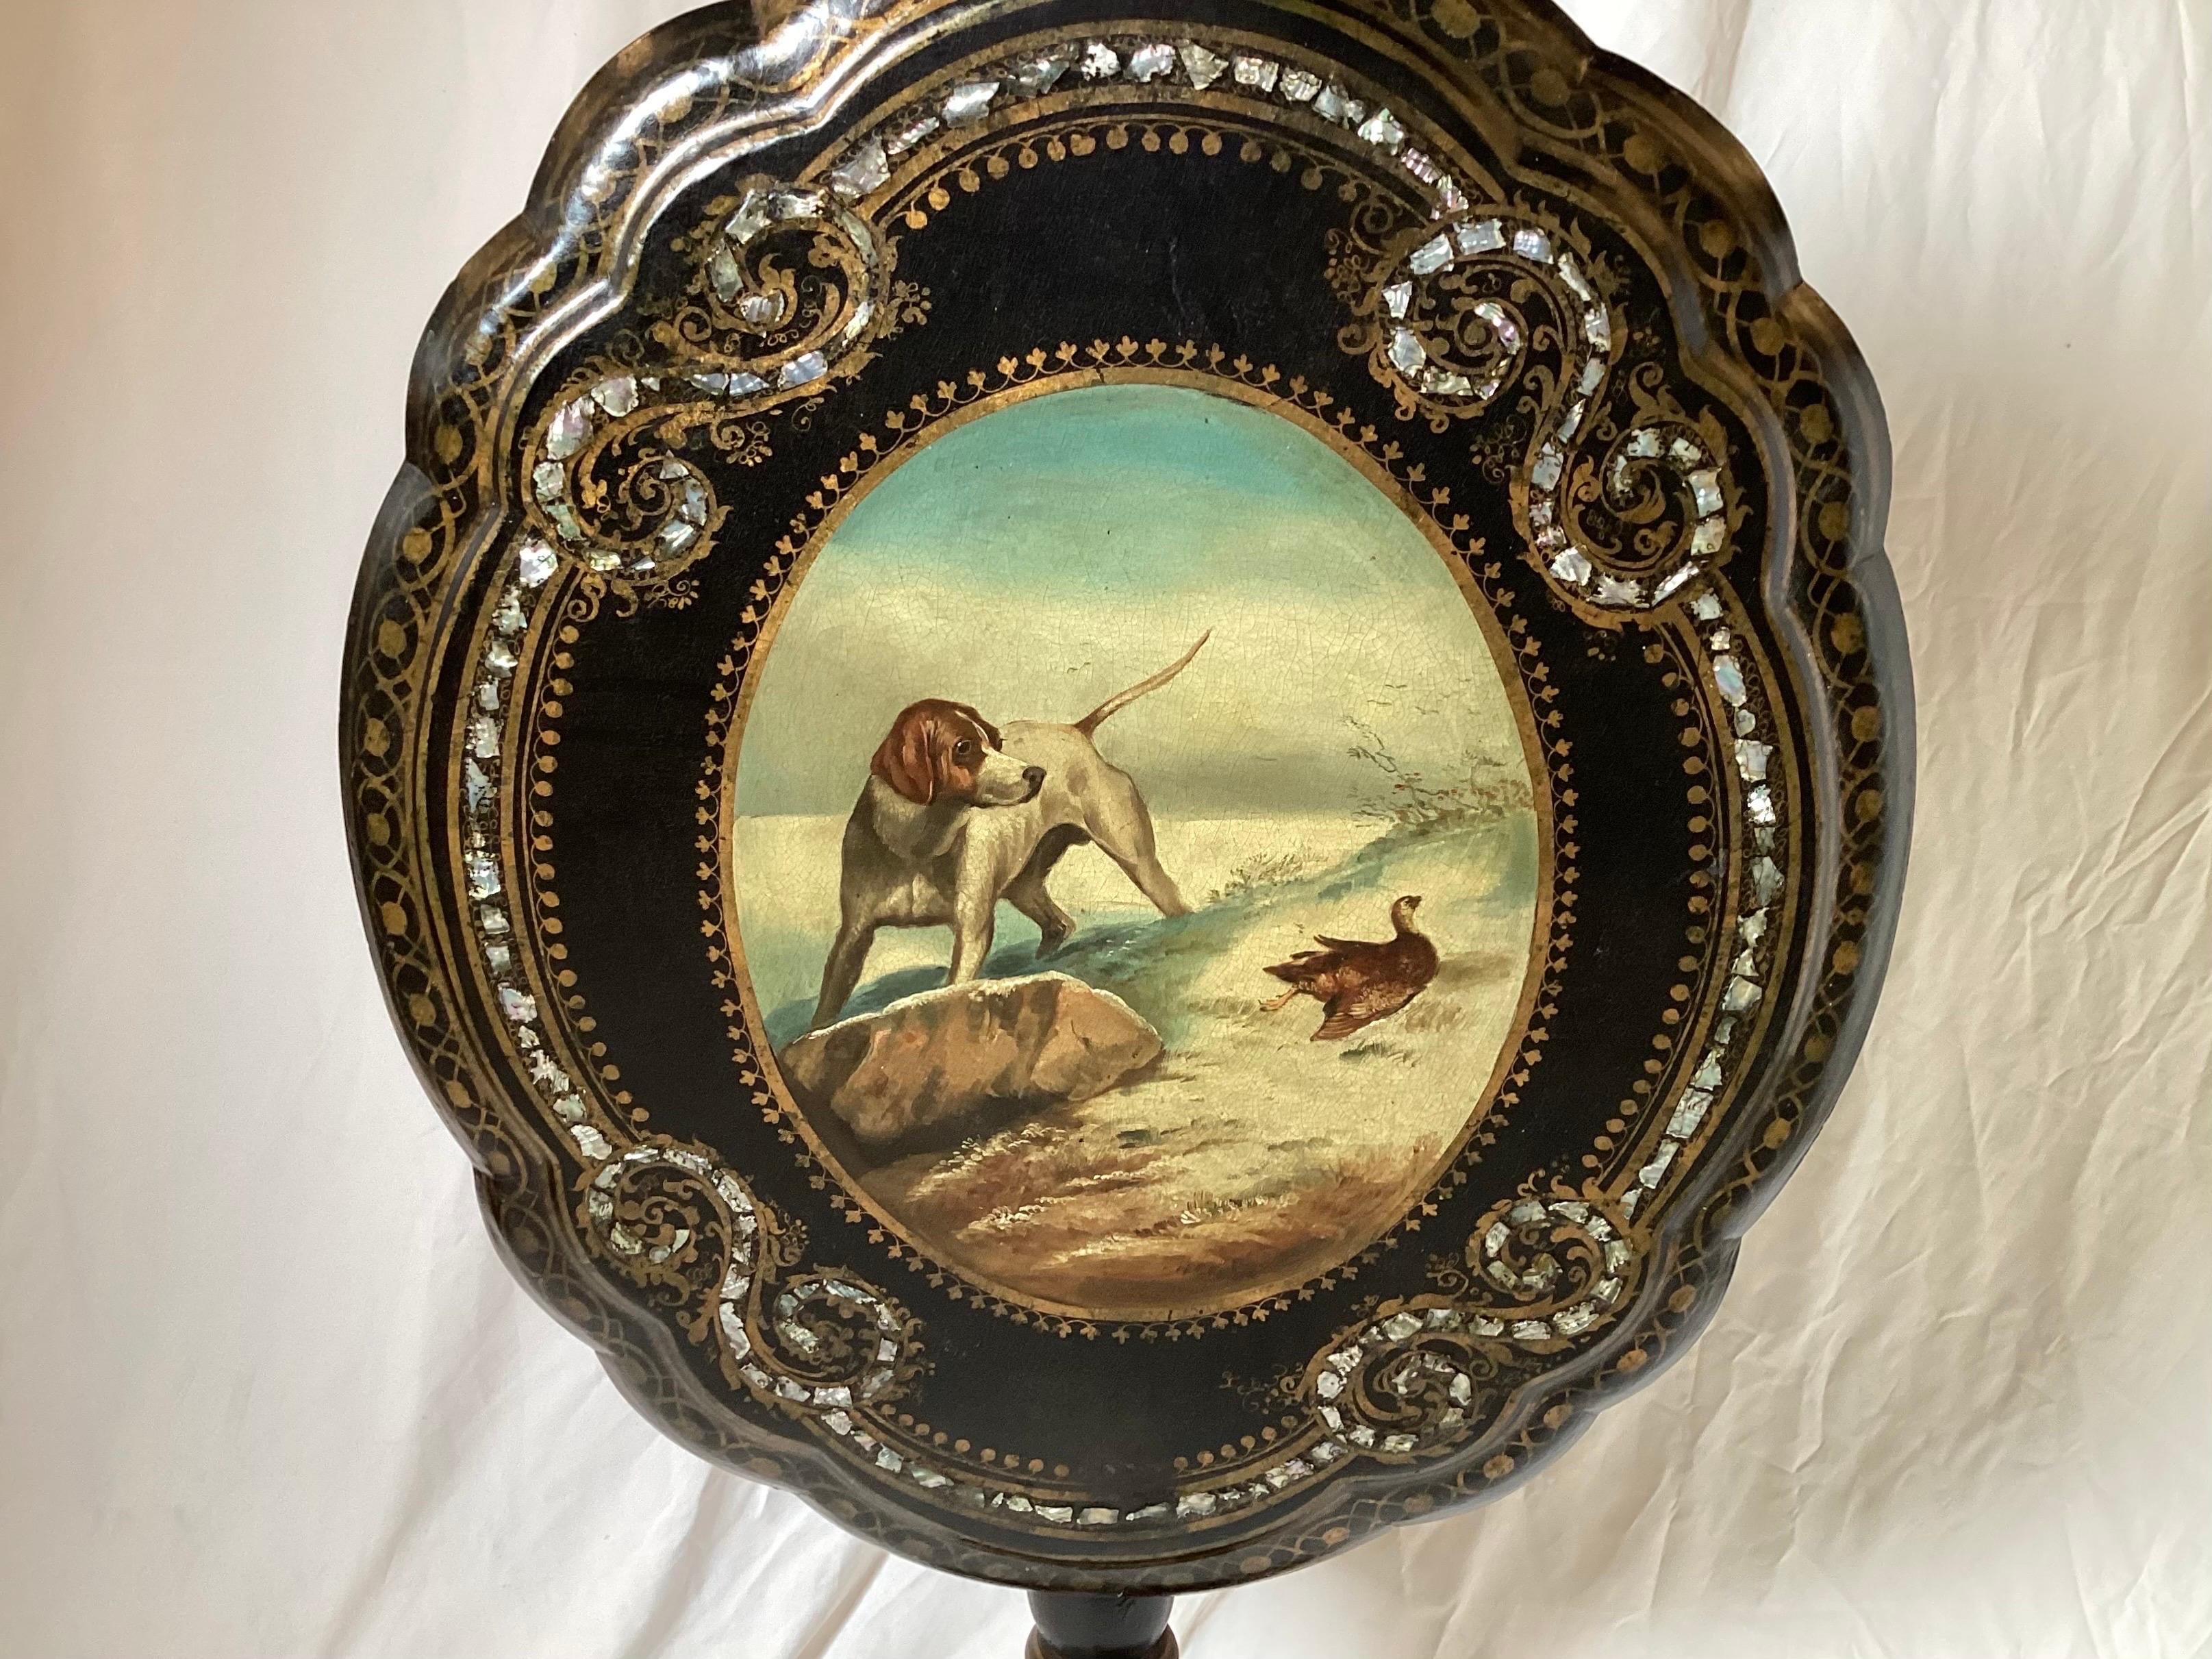 An English shell inlaid, parcel gilt, paint decorated and ebonized papier mache tilt-top tea table, mid 19th century, the top centered by a scene depicting an English Pointer hunting dog pursuing a grouse.

Dimensions:height 23, width 28 deep 27